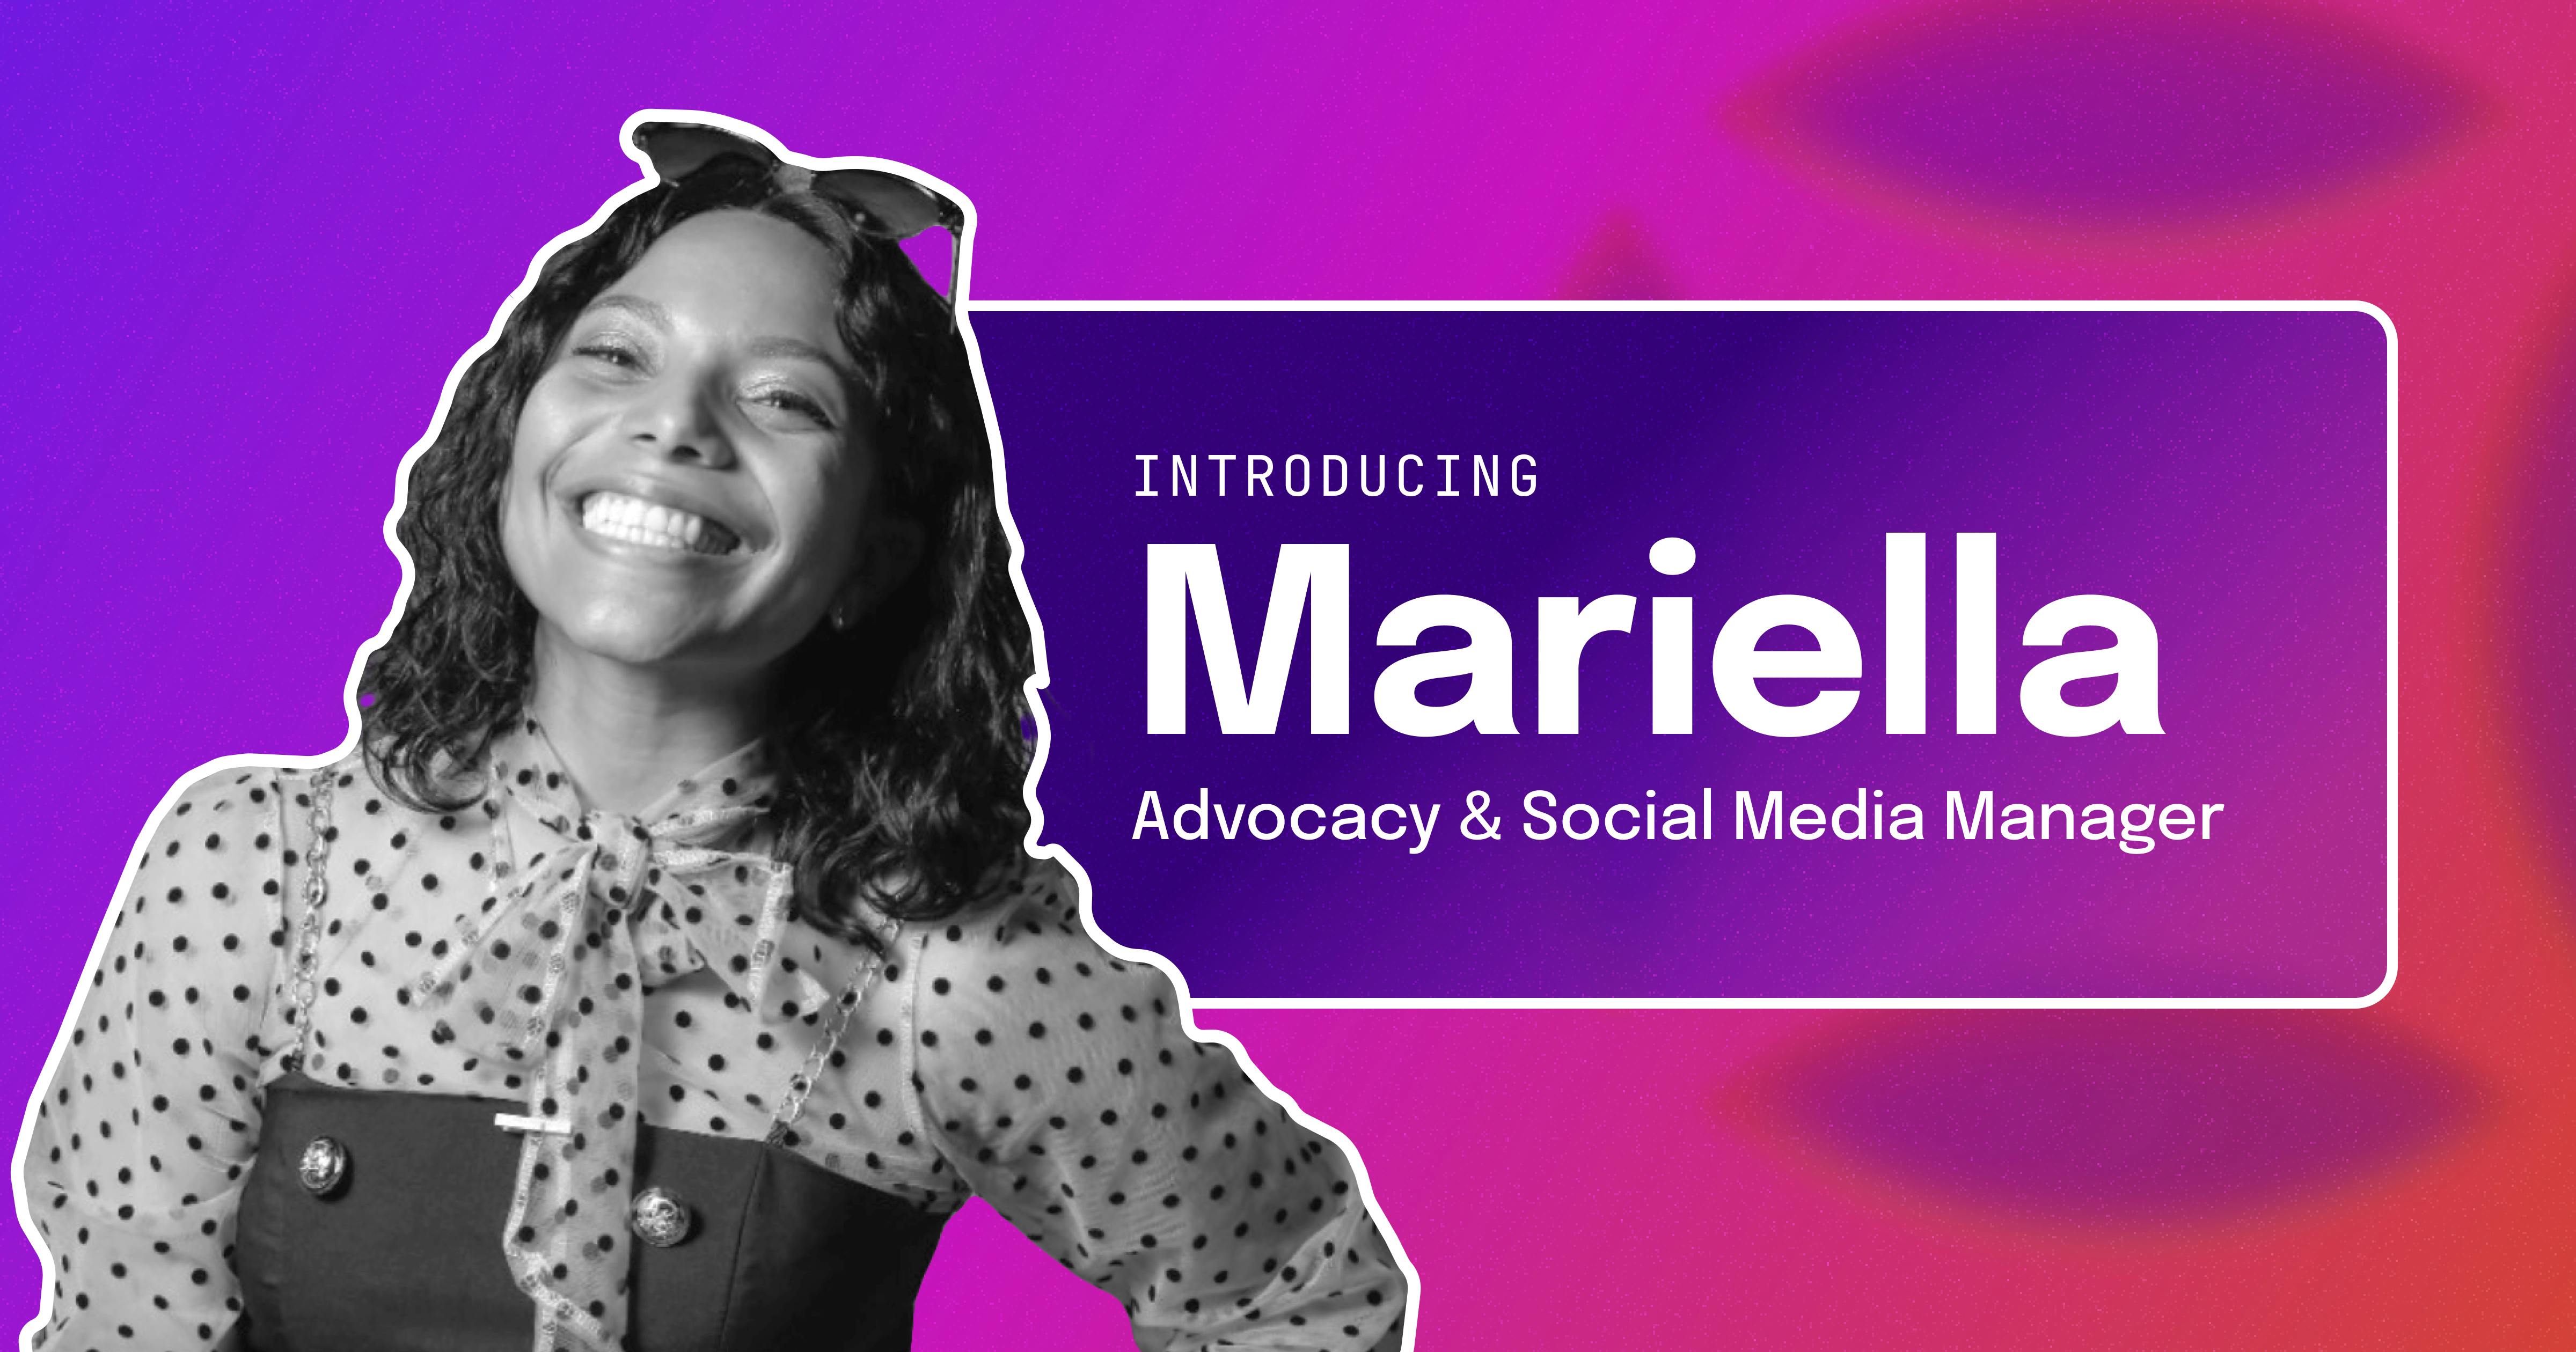 Mariella smiles at the camera, with a caption that reads "Introducing Mariella, Advocacy & Social Media Manager."